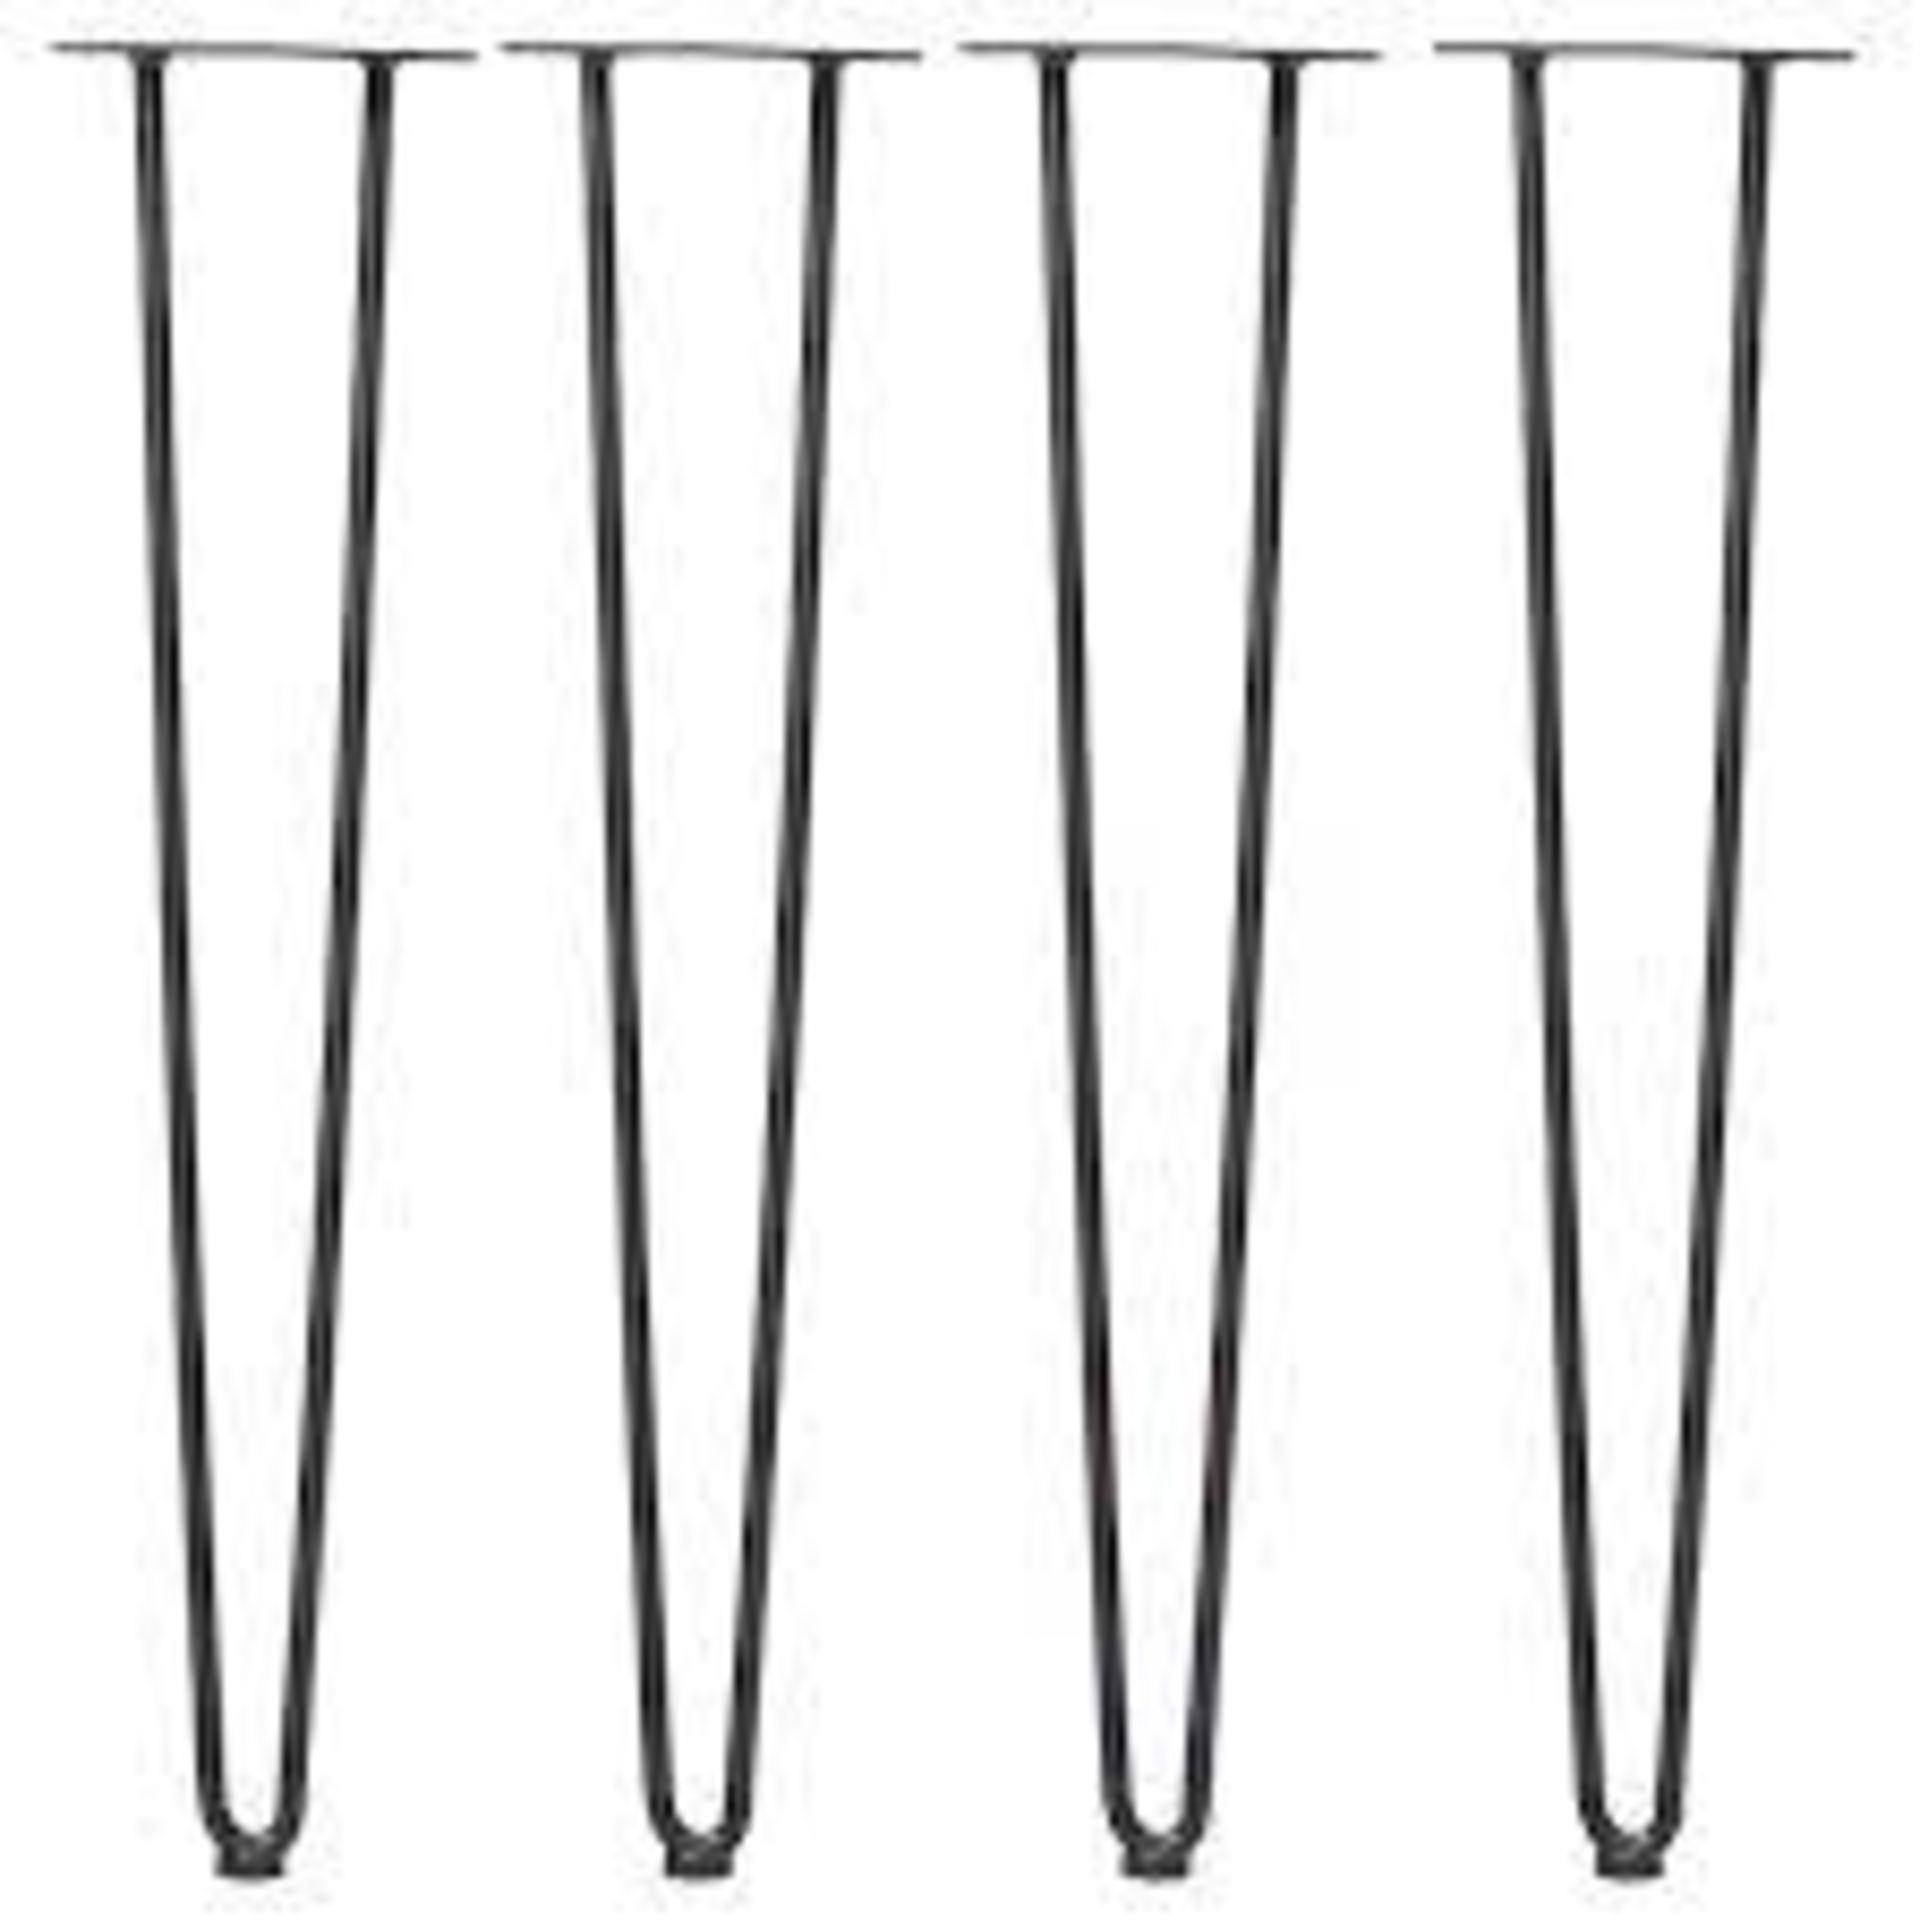 20 X BRAND NEW PACKS OF 4 NATURAL HAIRPIN LEGS R17-4